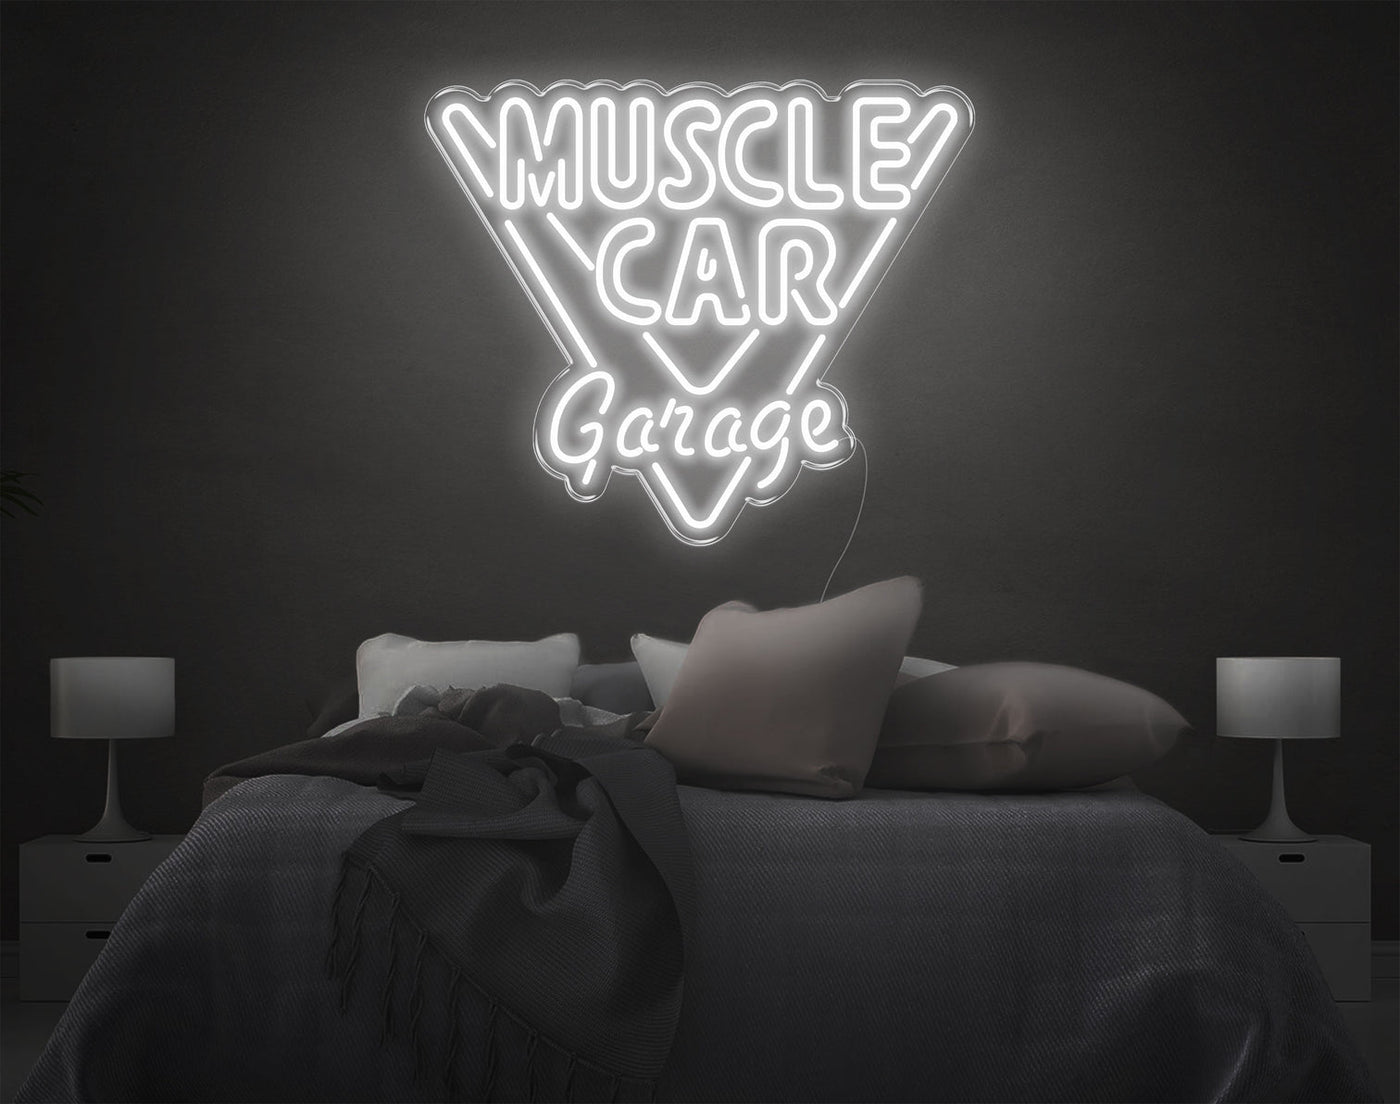 Muscle Car Garage LED Neon Sign - 22inch x 26inchWhite